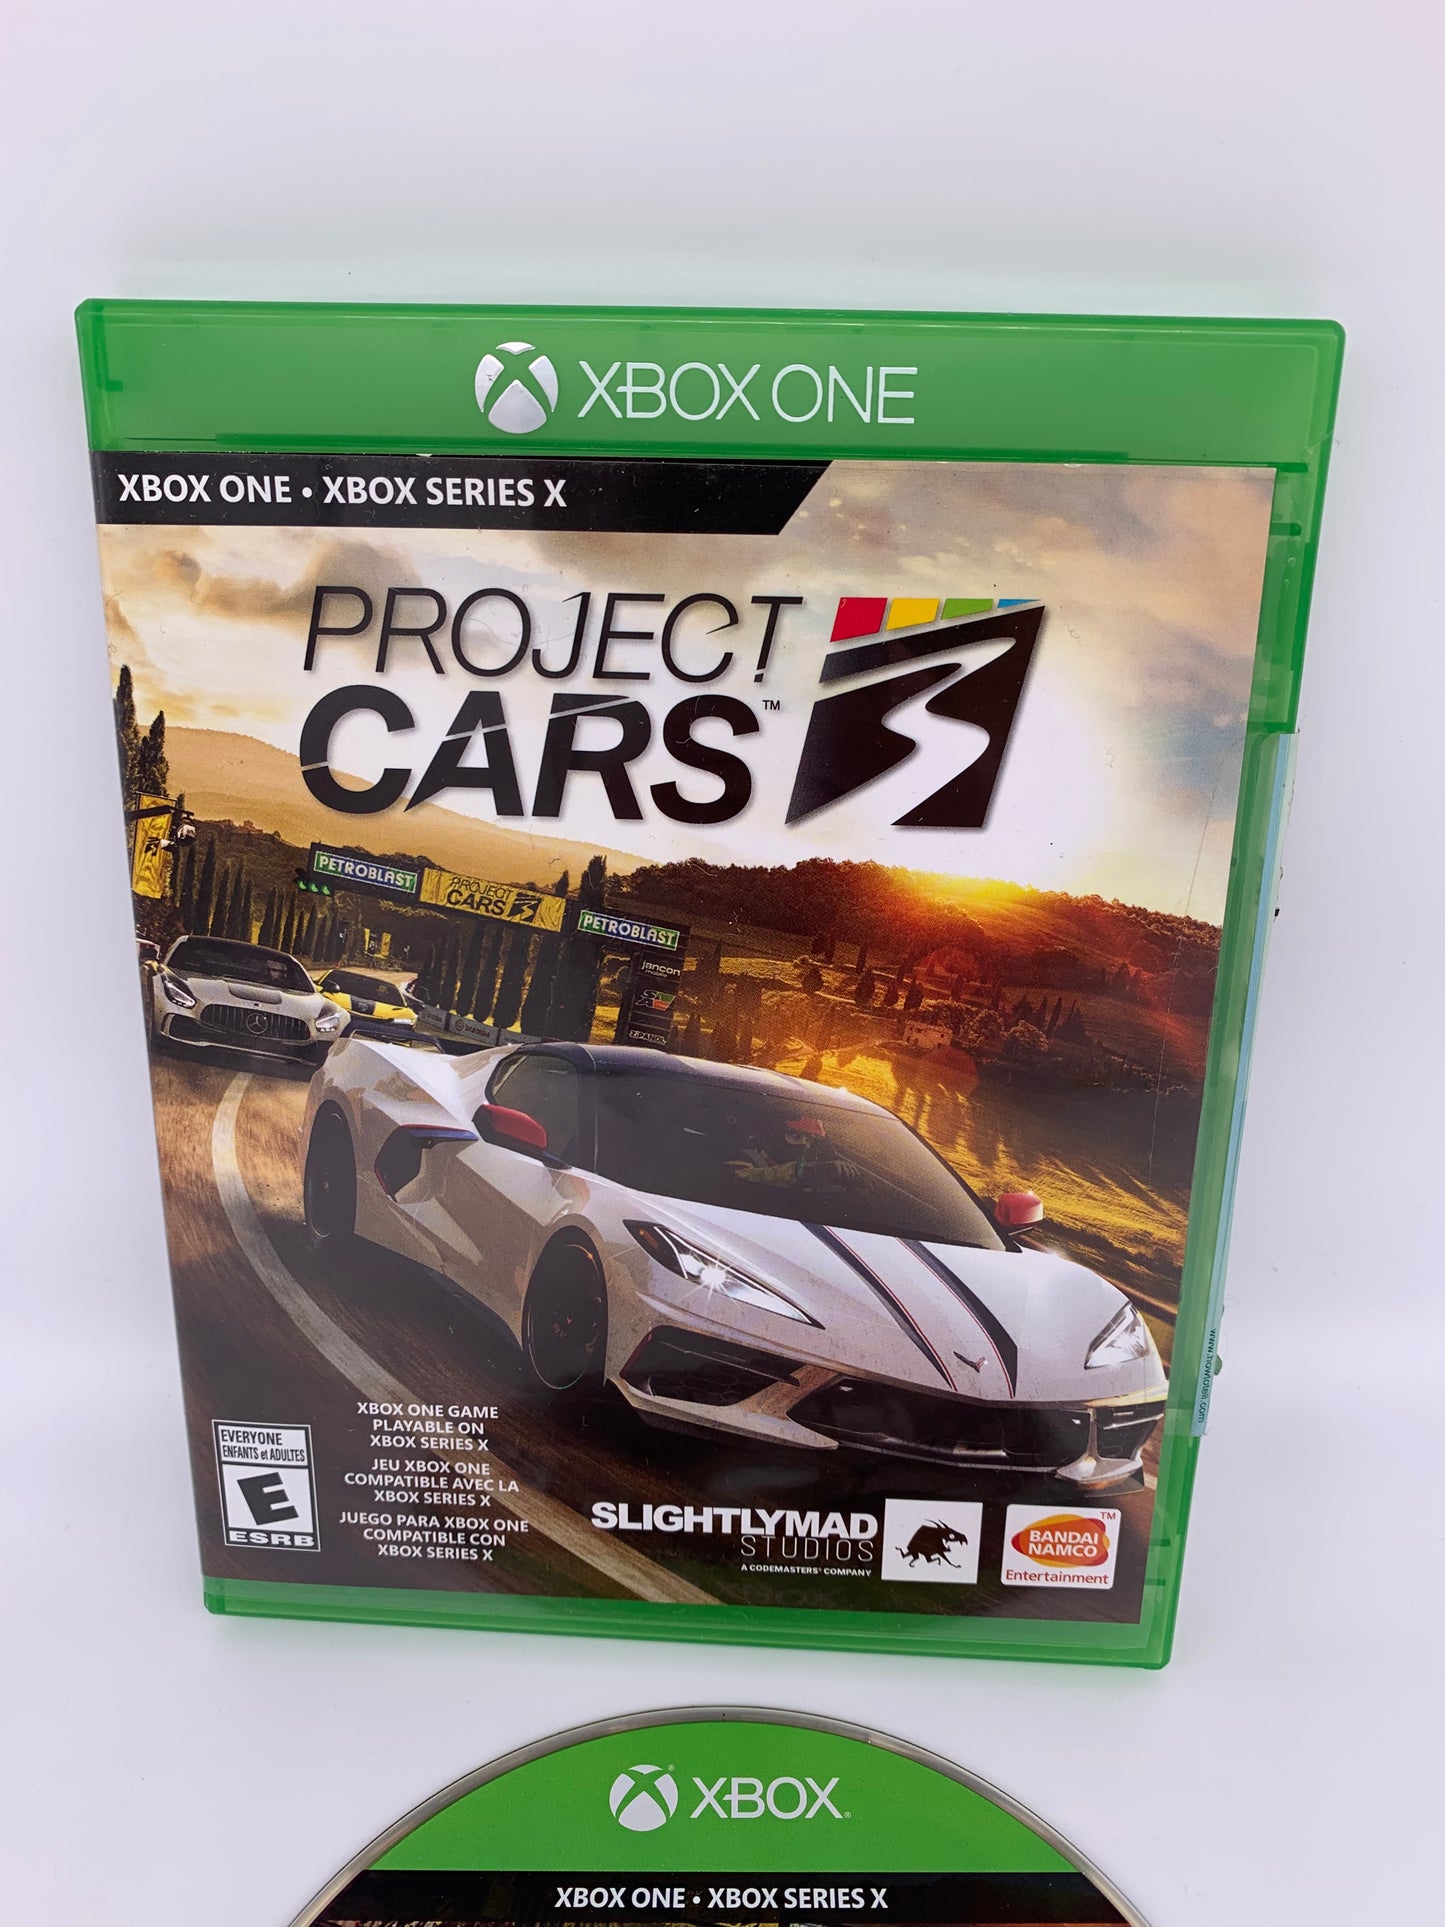 MiCROSOFT XBOX ONE & SERiES X | PROJECT CARS 3